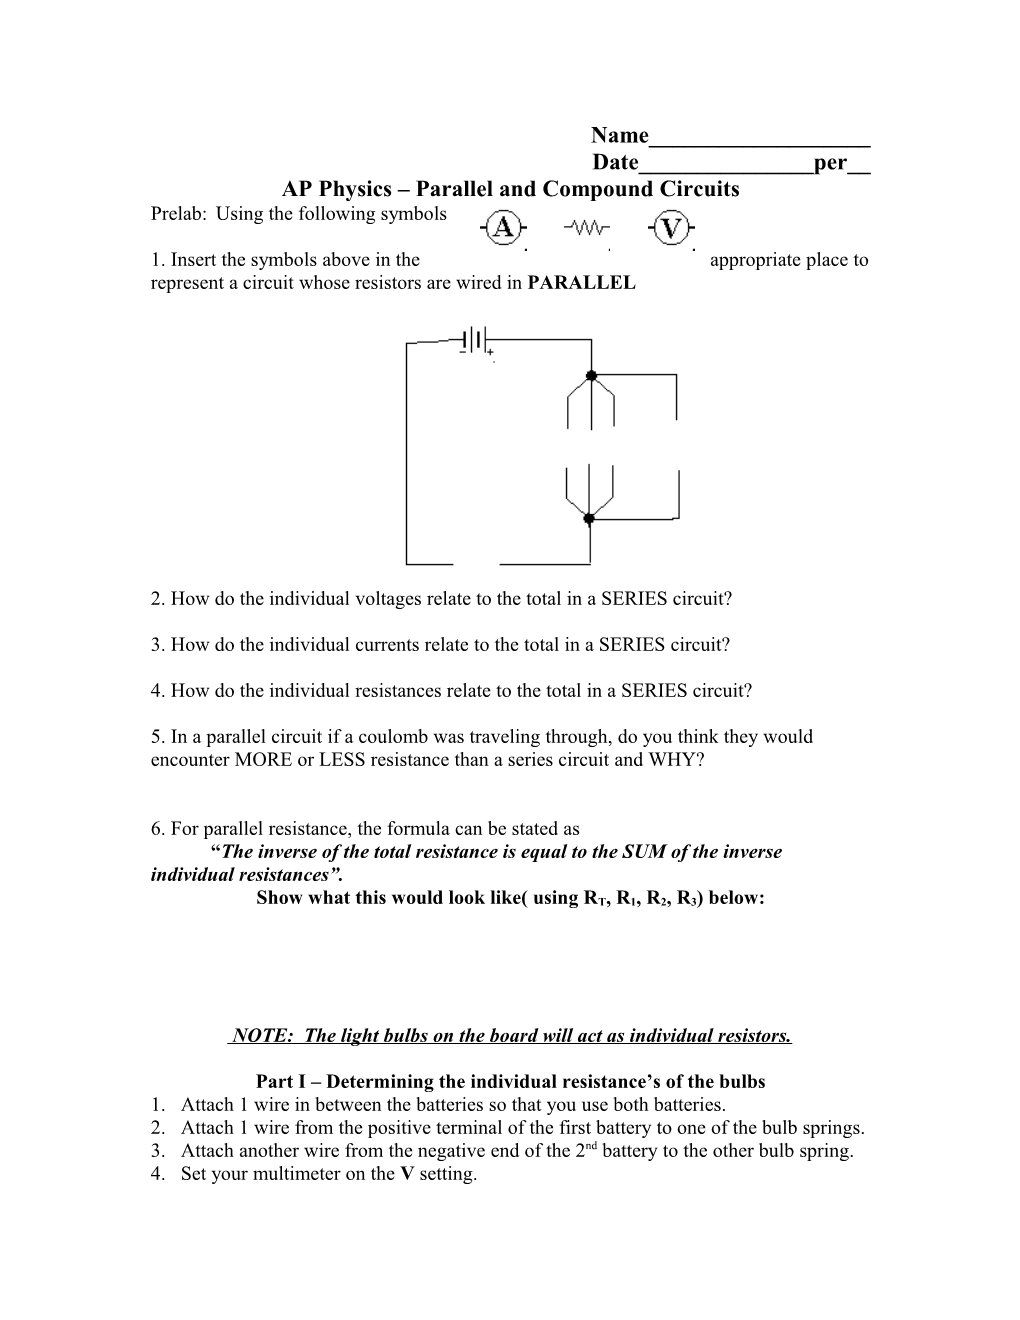 AP Physics Parallel and Compound Circuits